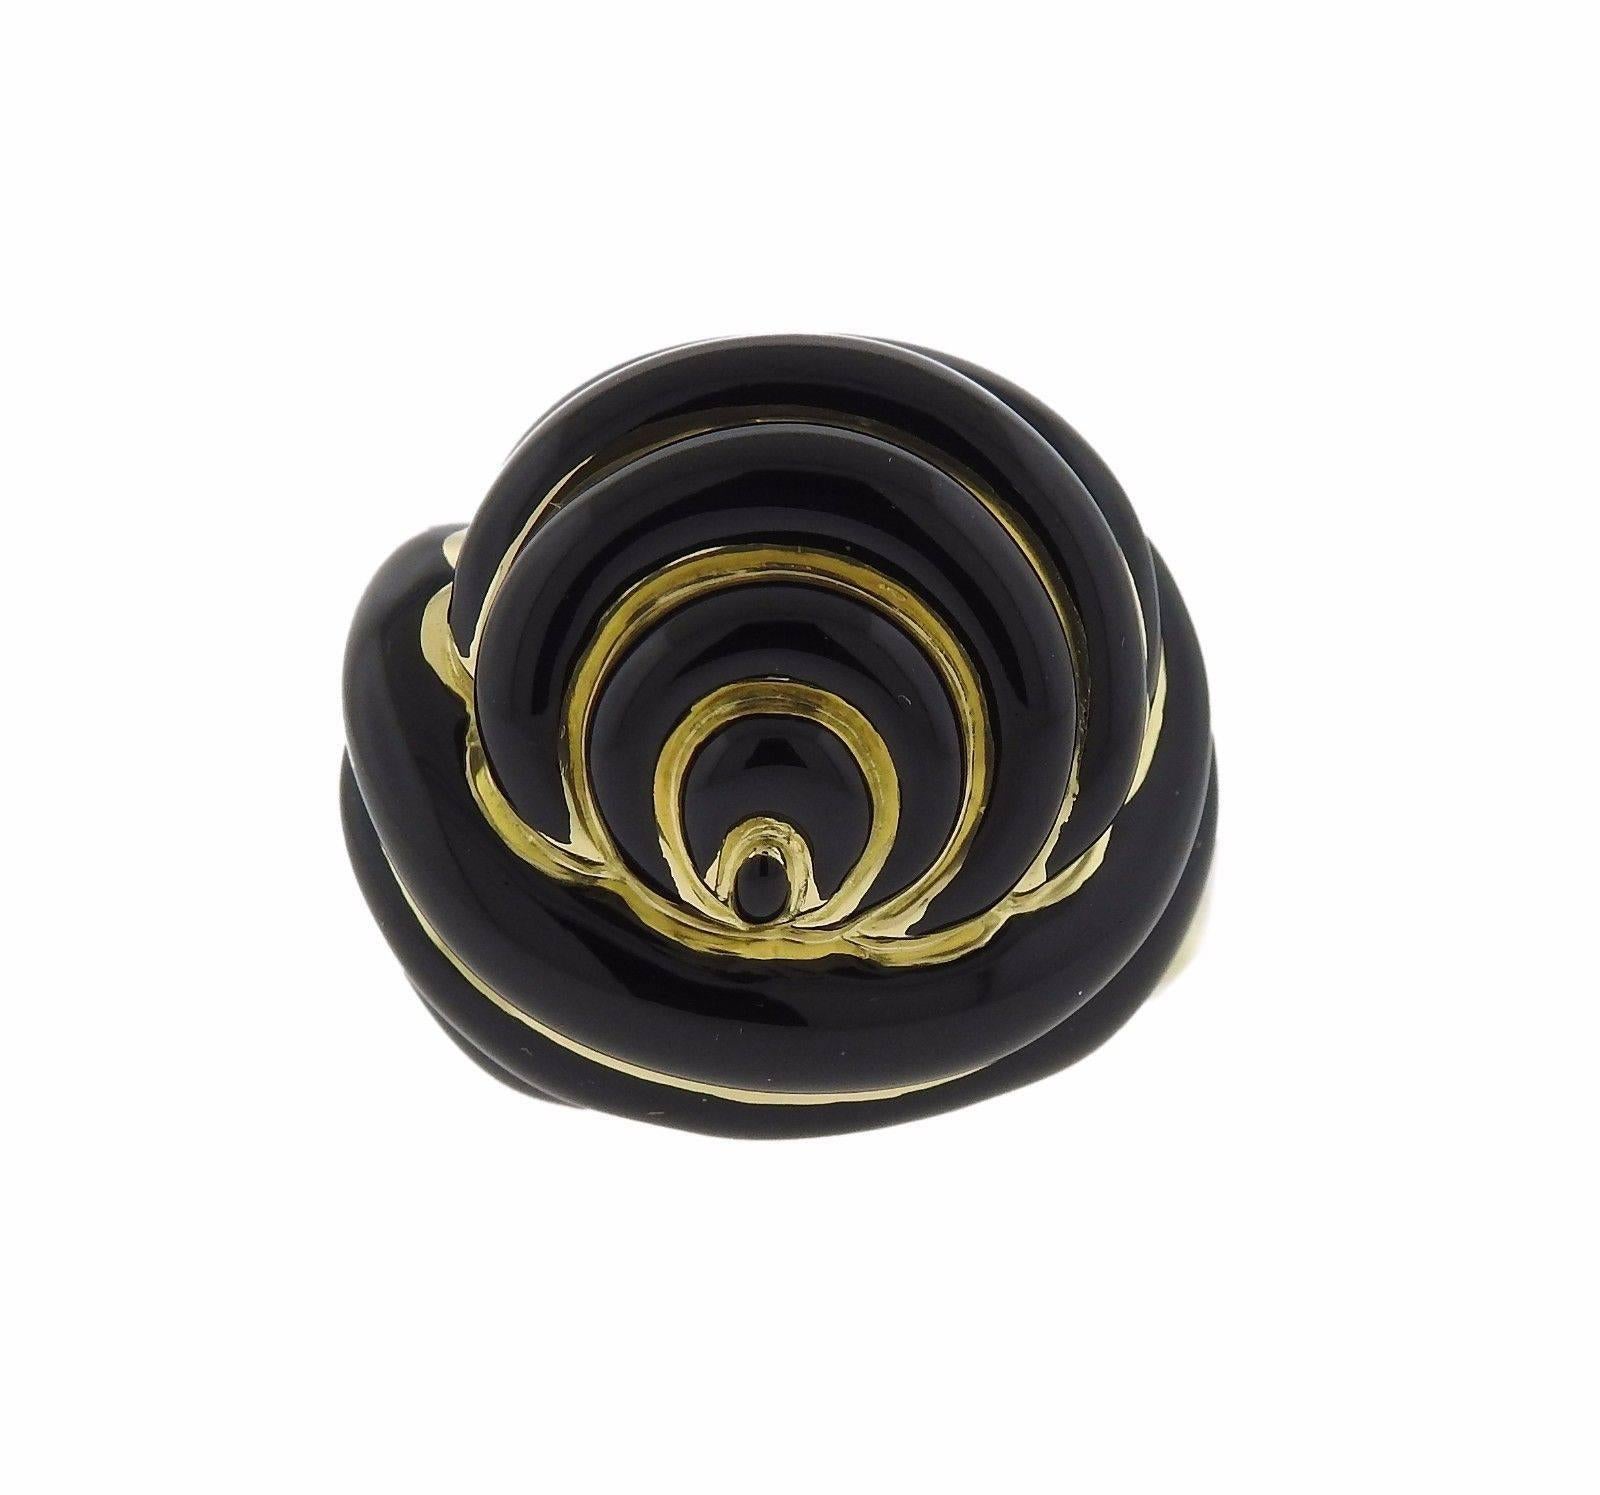 An 18k yellow gold ring set with black enamel.  The ring is a size 8.  The ring top is 24mm x 26mm and sits 16mm from the top of the finger.  The weight of the piece is 27.4 grams.  Marked: 18k A.Clunn.